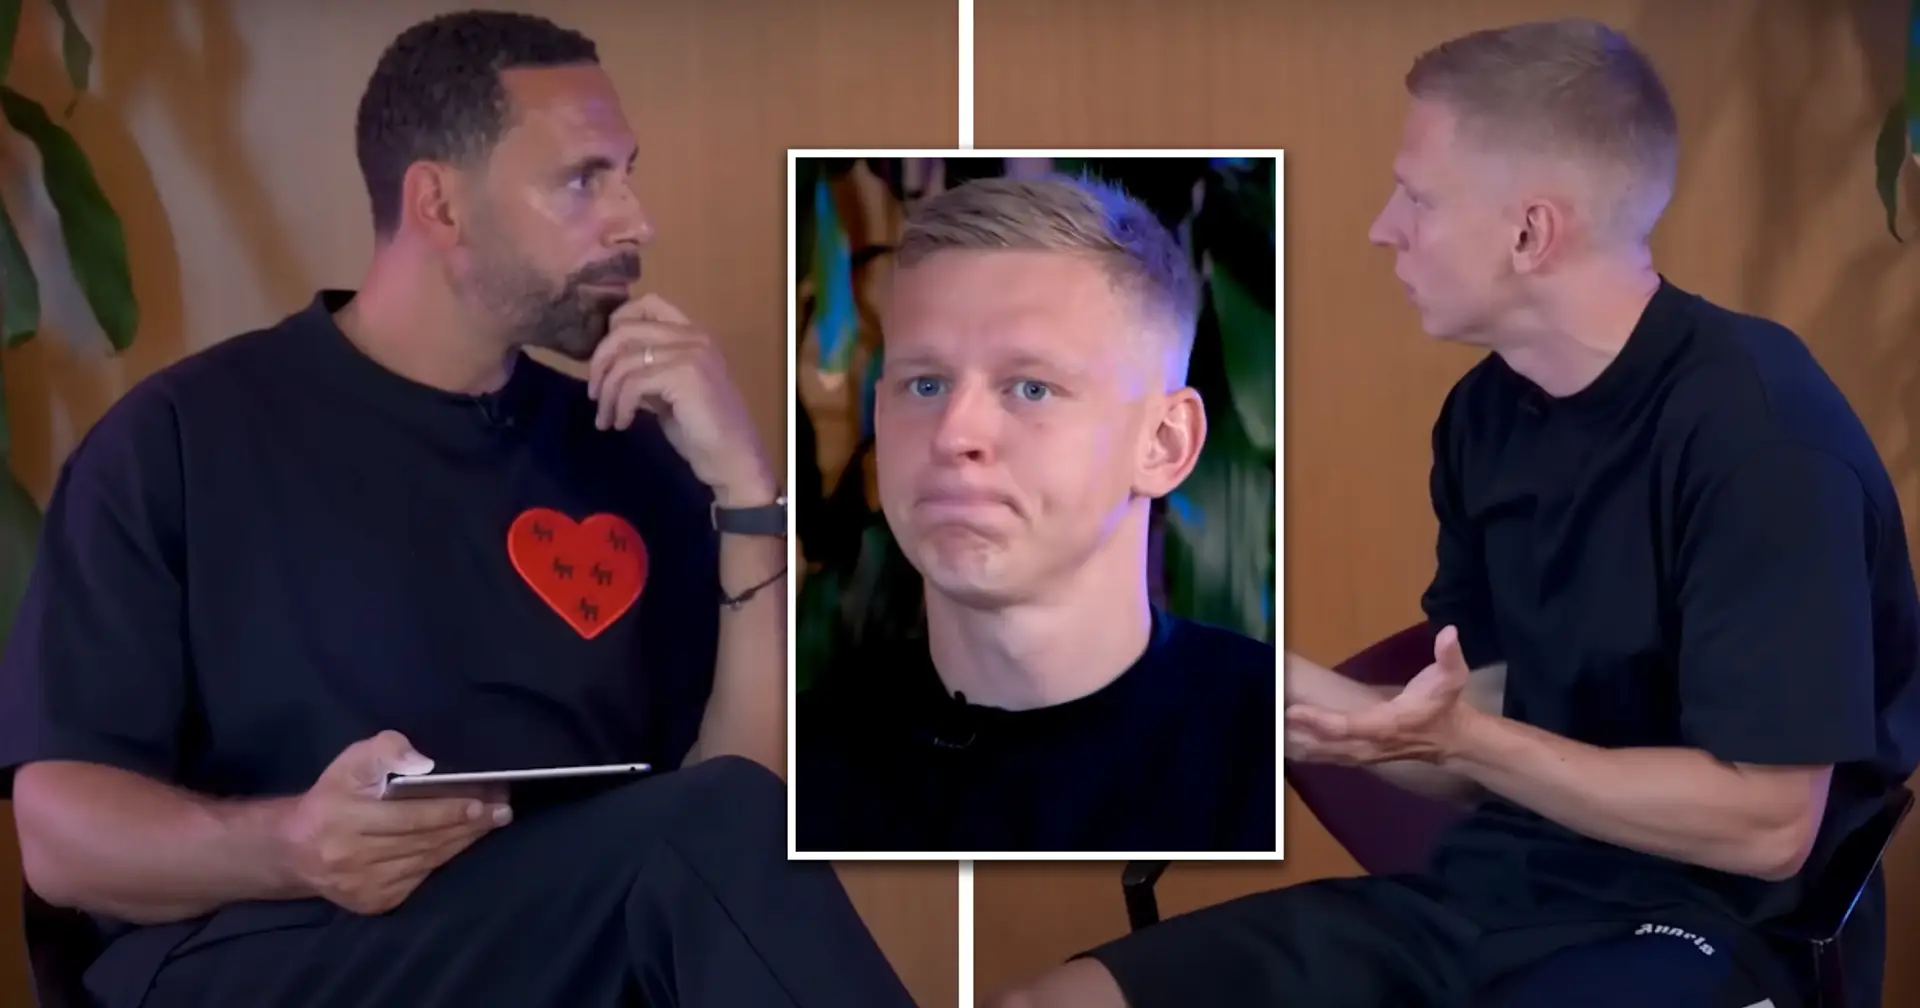 'Imagine his pace against me, I’m finished': Zinchenko names Liverpool player as his toughest opponent